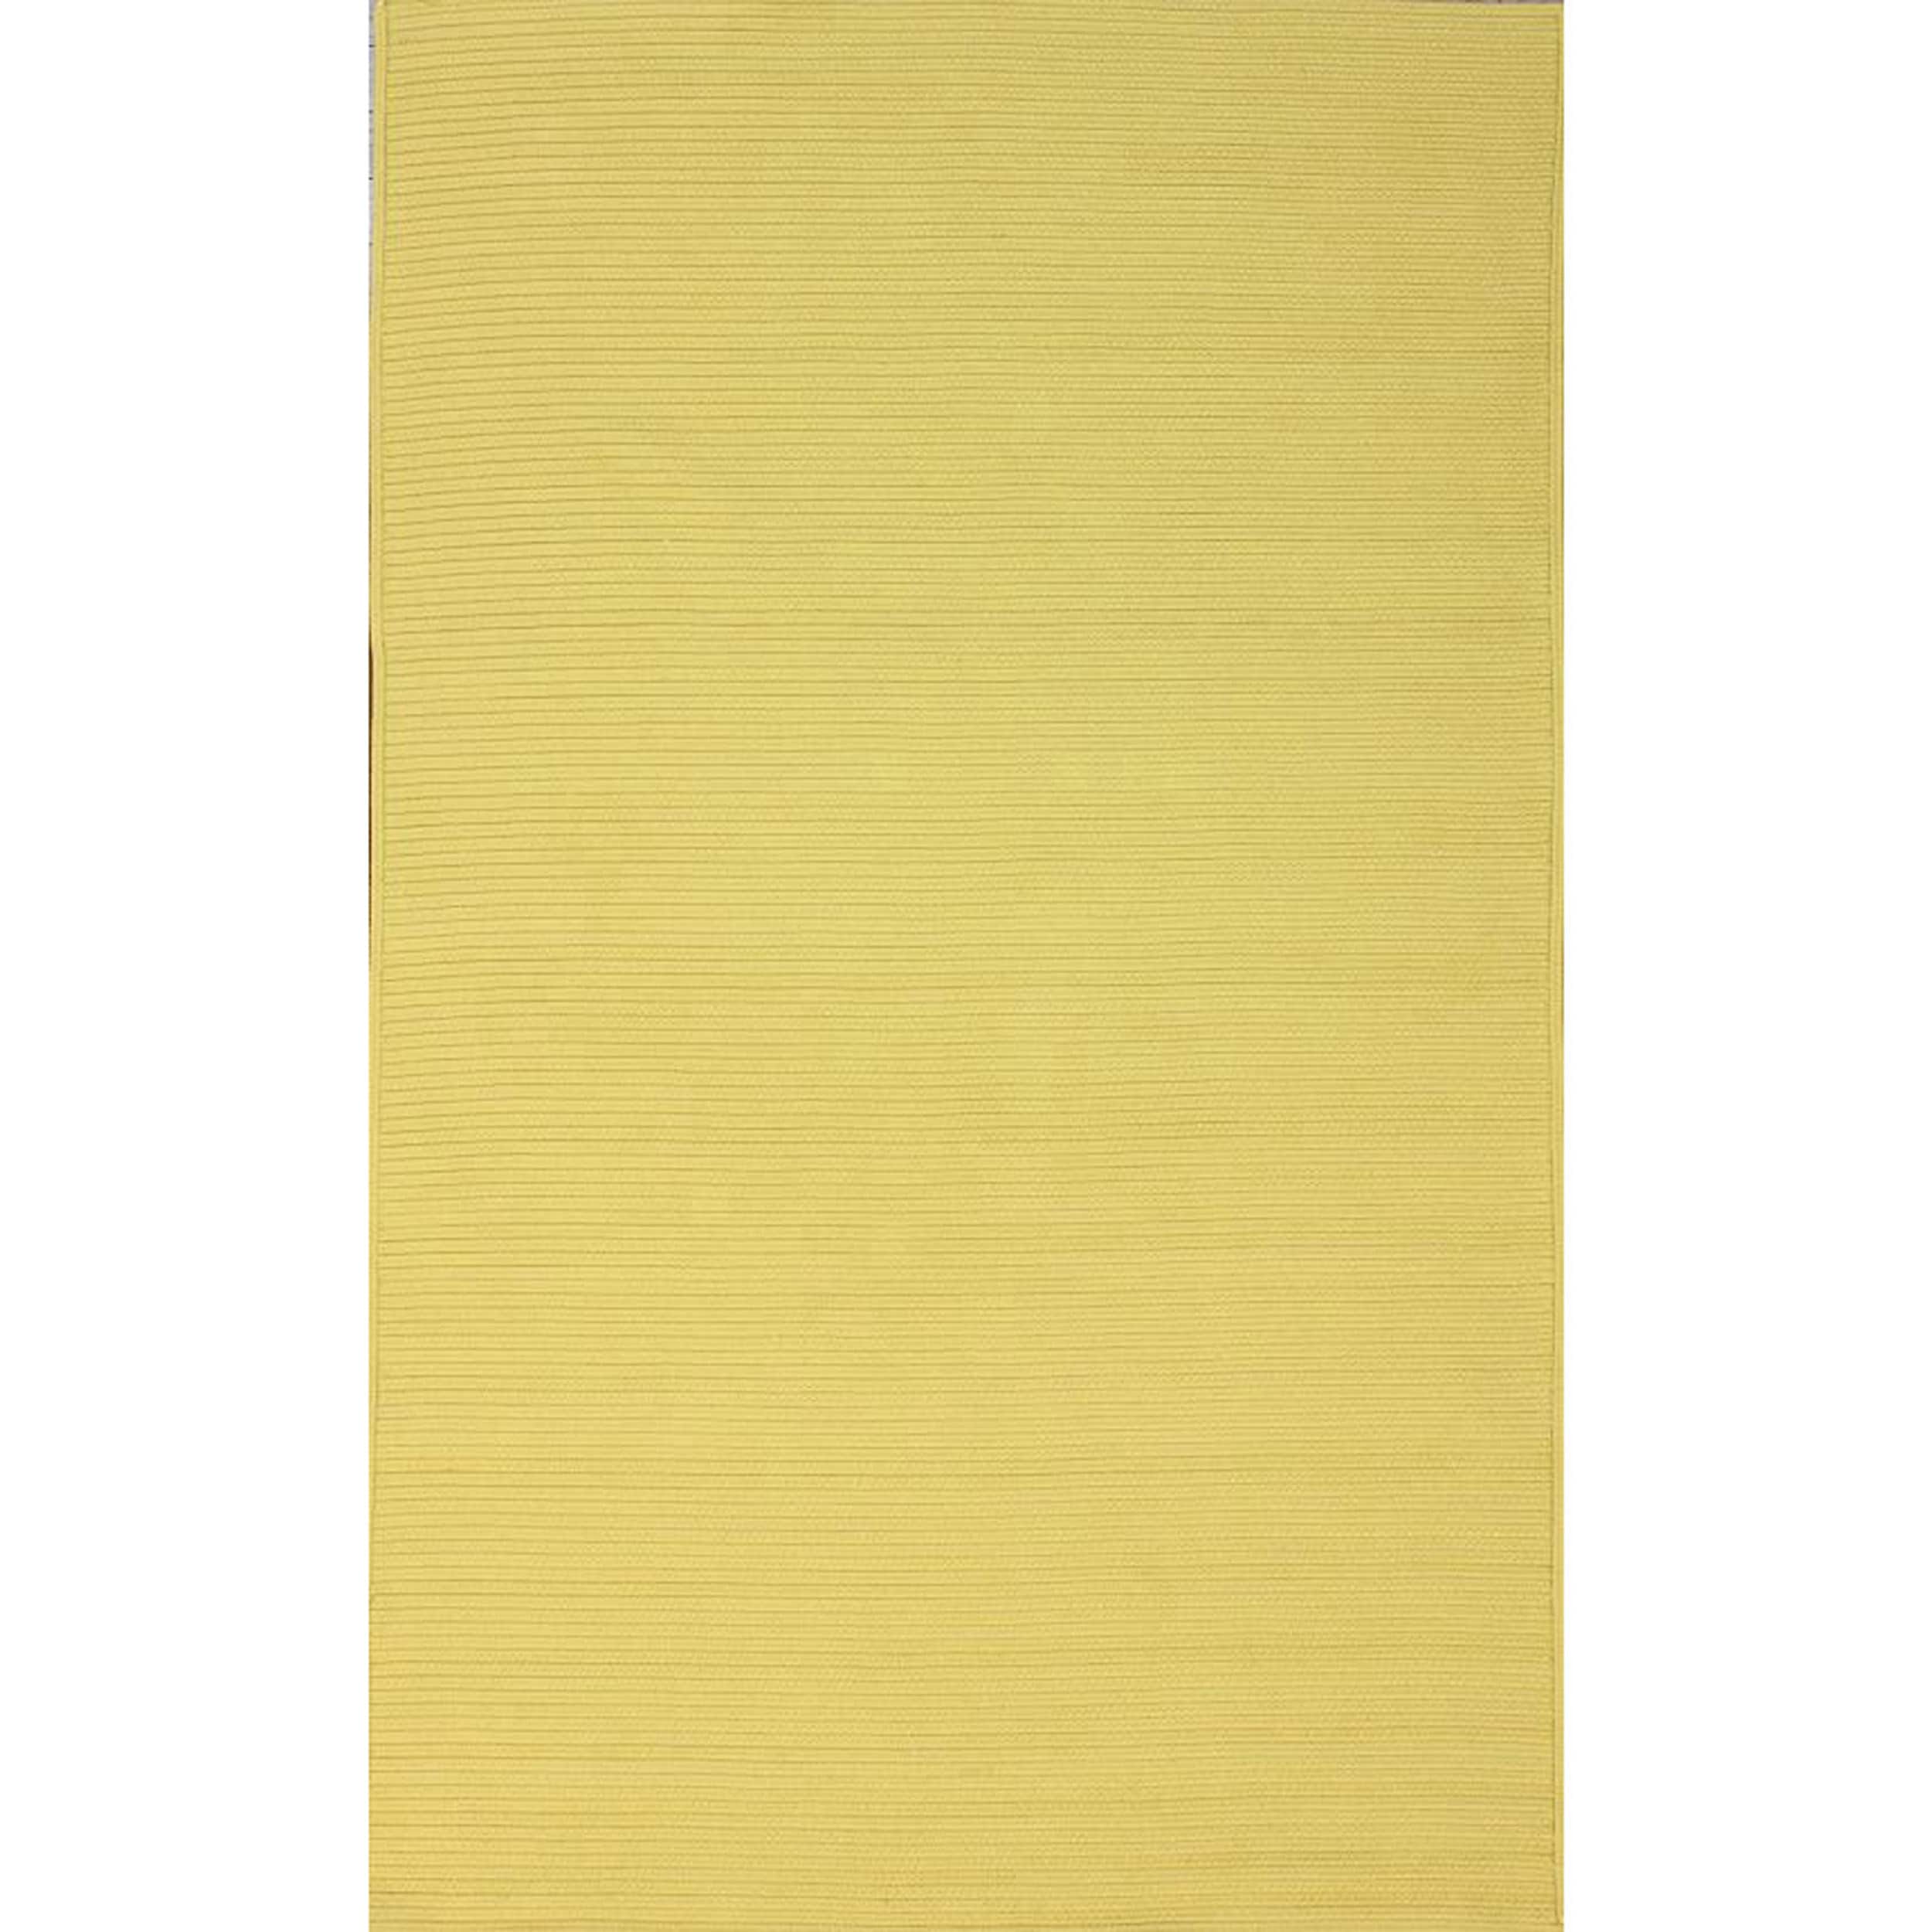 Nuloom Handmade Indoor/ Outdoor Braided Yellow Rug (5 X 8) (YellowPattern Indoor / OutdoorTip We recommend the use of a non skid pad to keep the rug in place on smooth surfaces.All rug sizes are approximate. Due to the difference of monitor colors, some